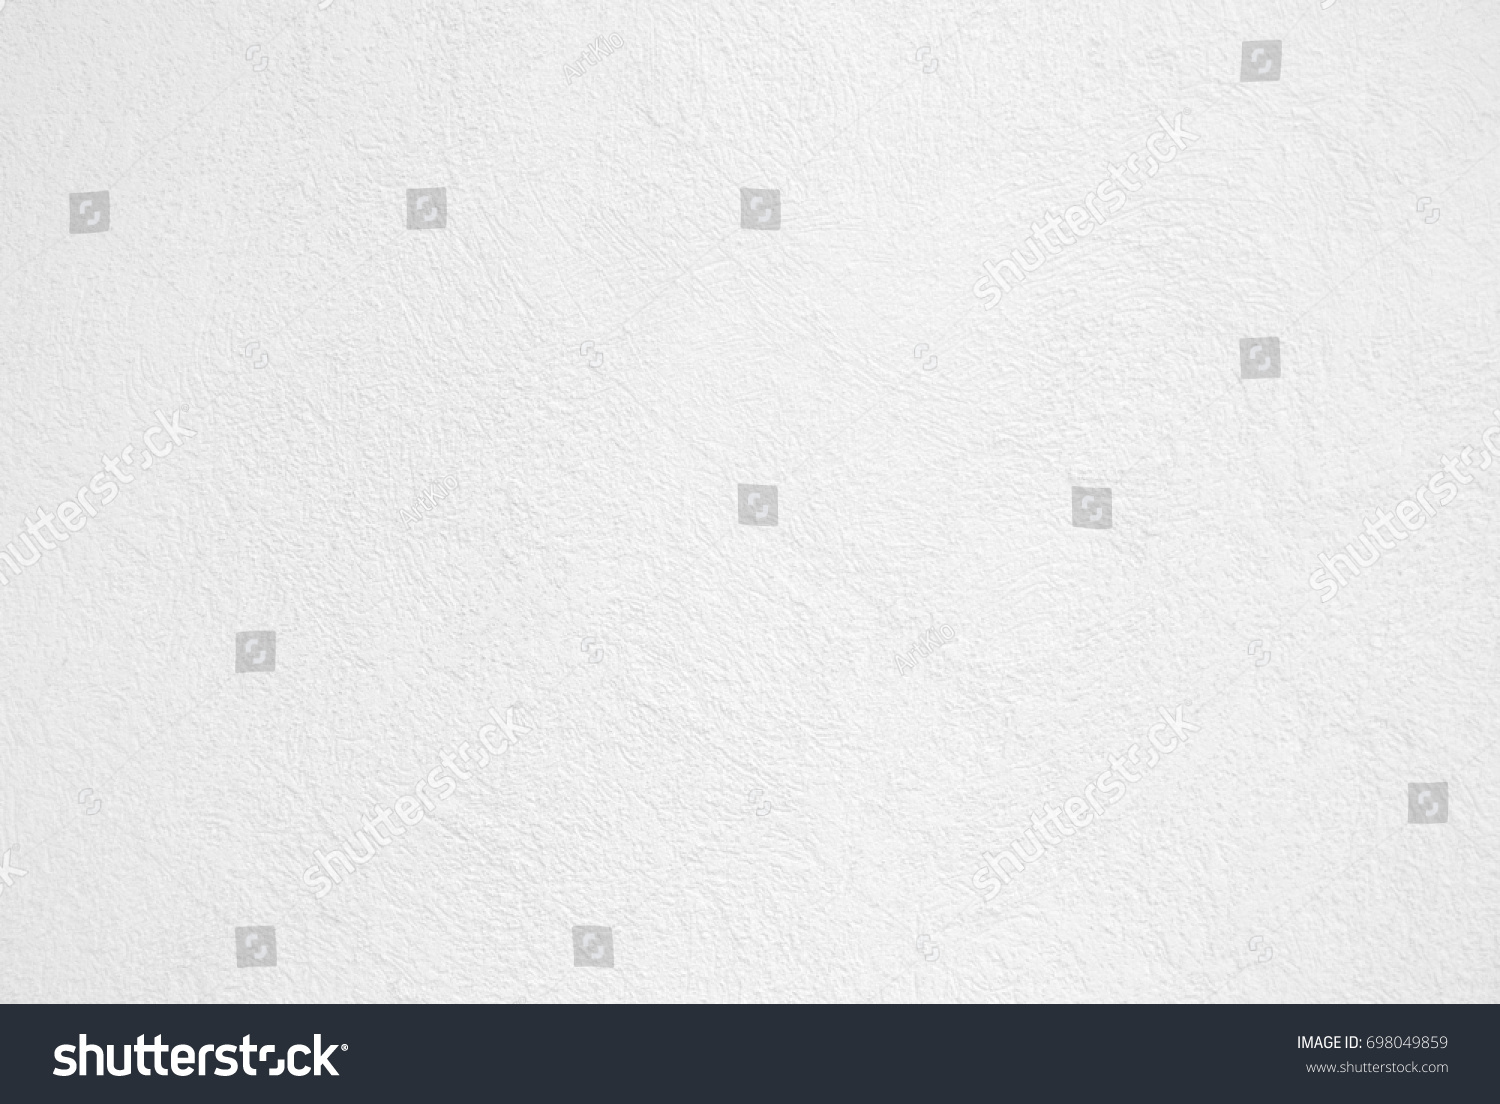 3,331,379 White wall stone Images, Stock Photos & Vectors | Shutterstock